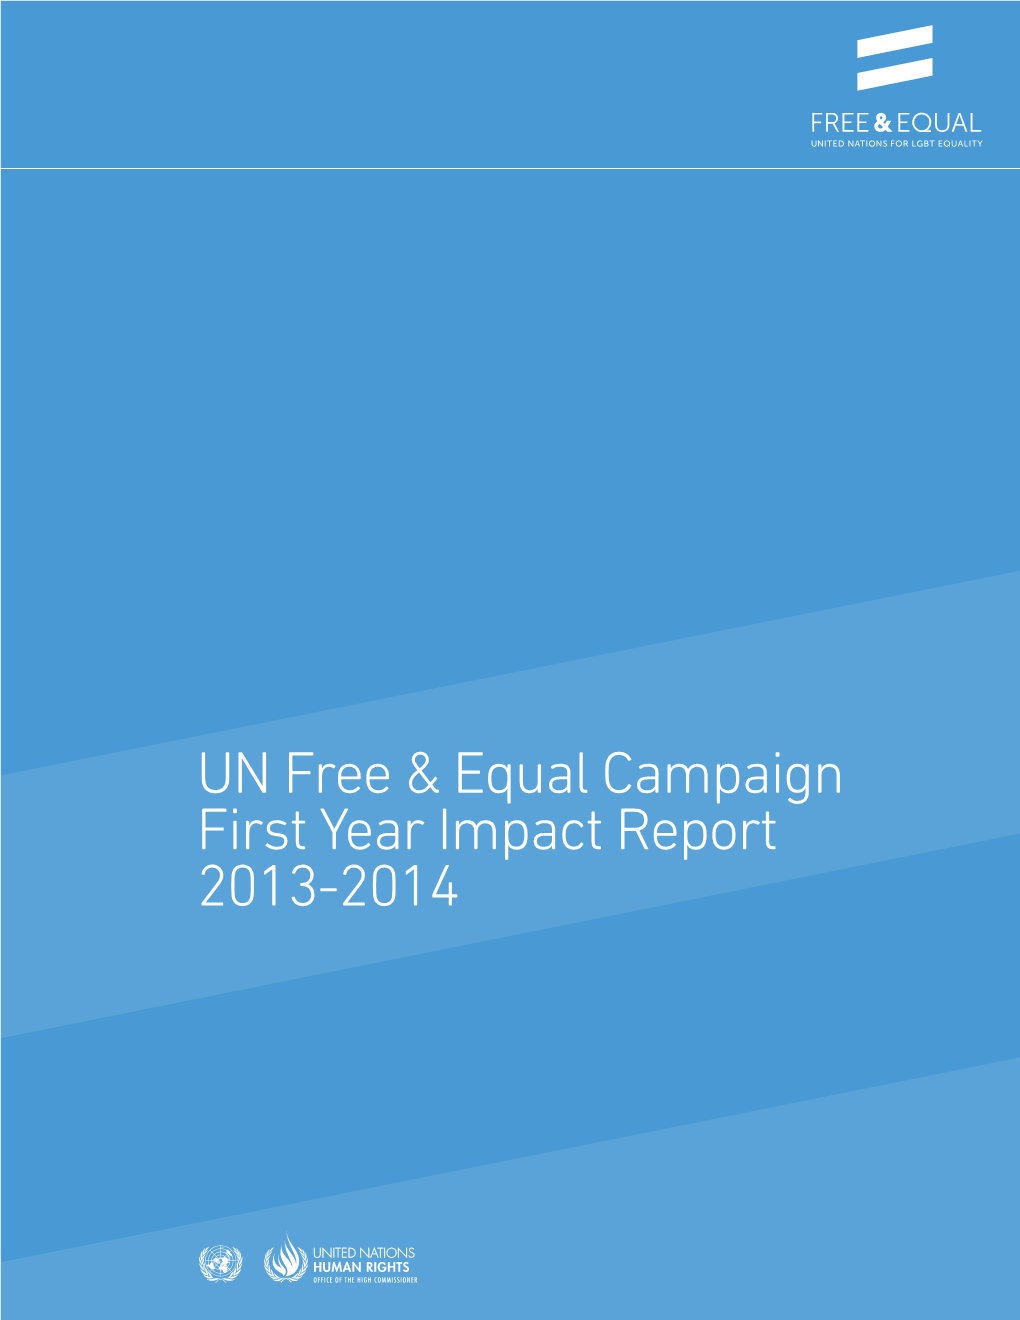 UN Free & Equal Campaign First Year Impact Report 2013-2014